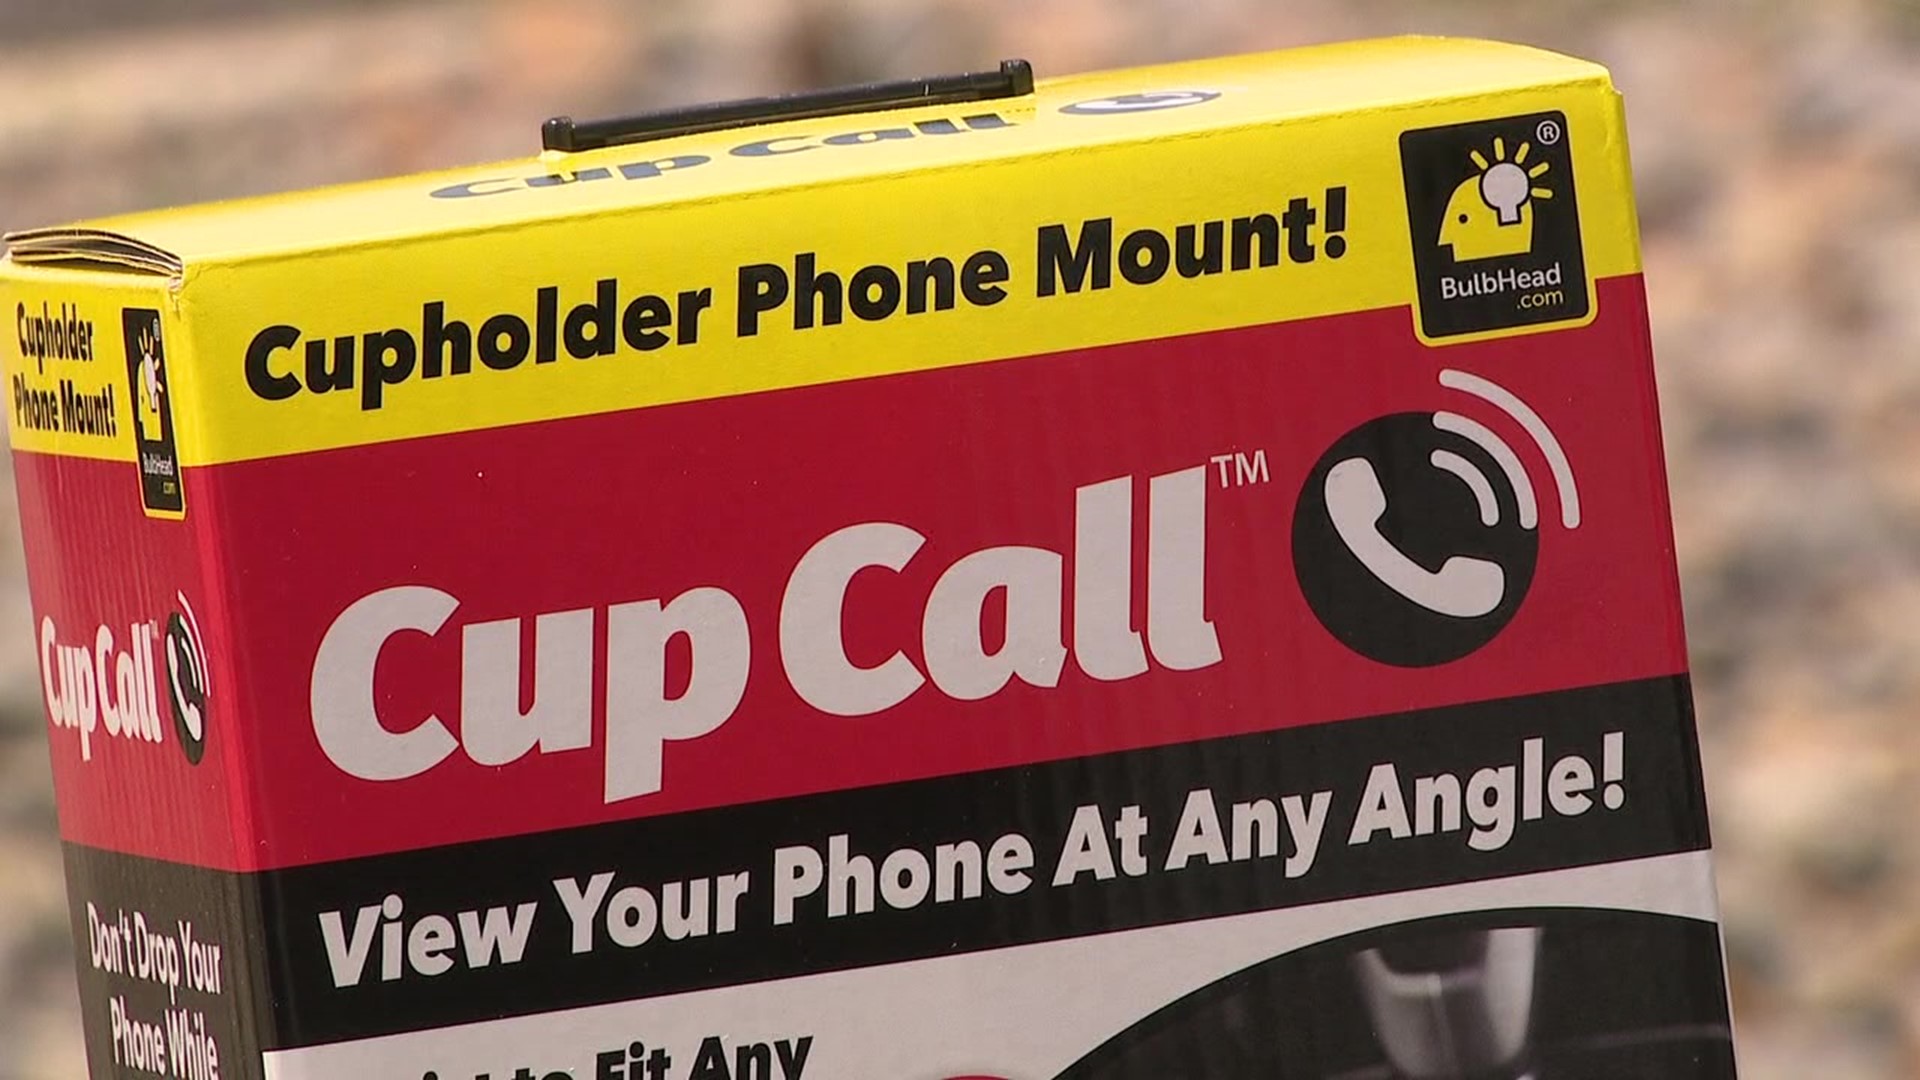 The maker claims you can easily charge your phone while in the Cup Call.